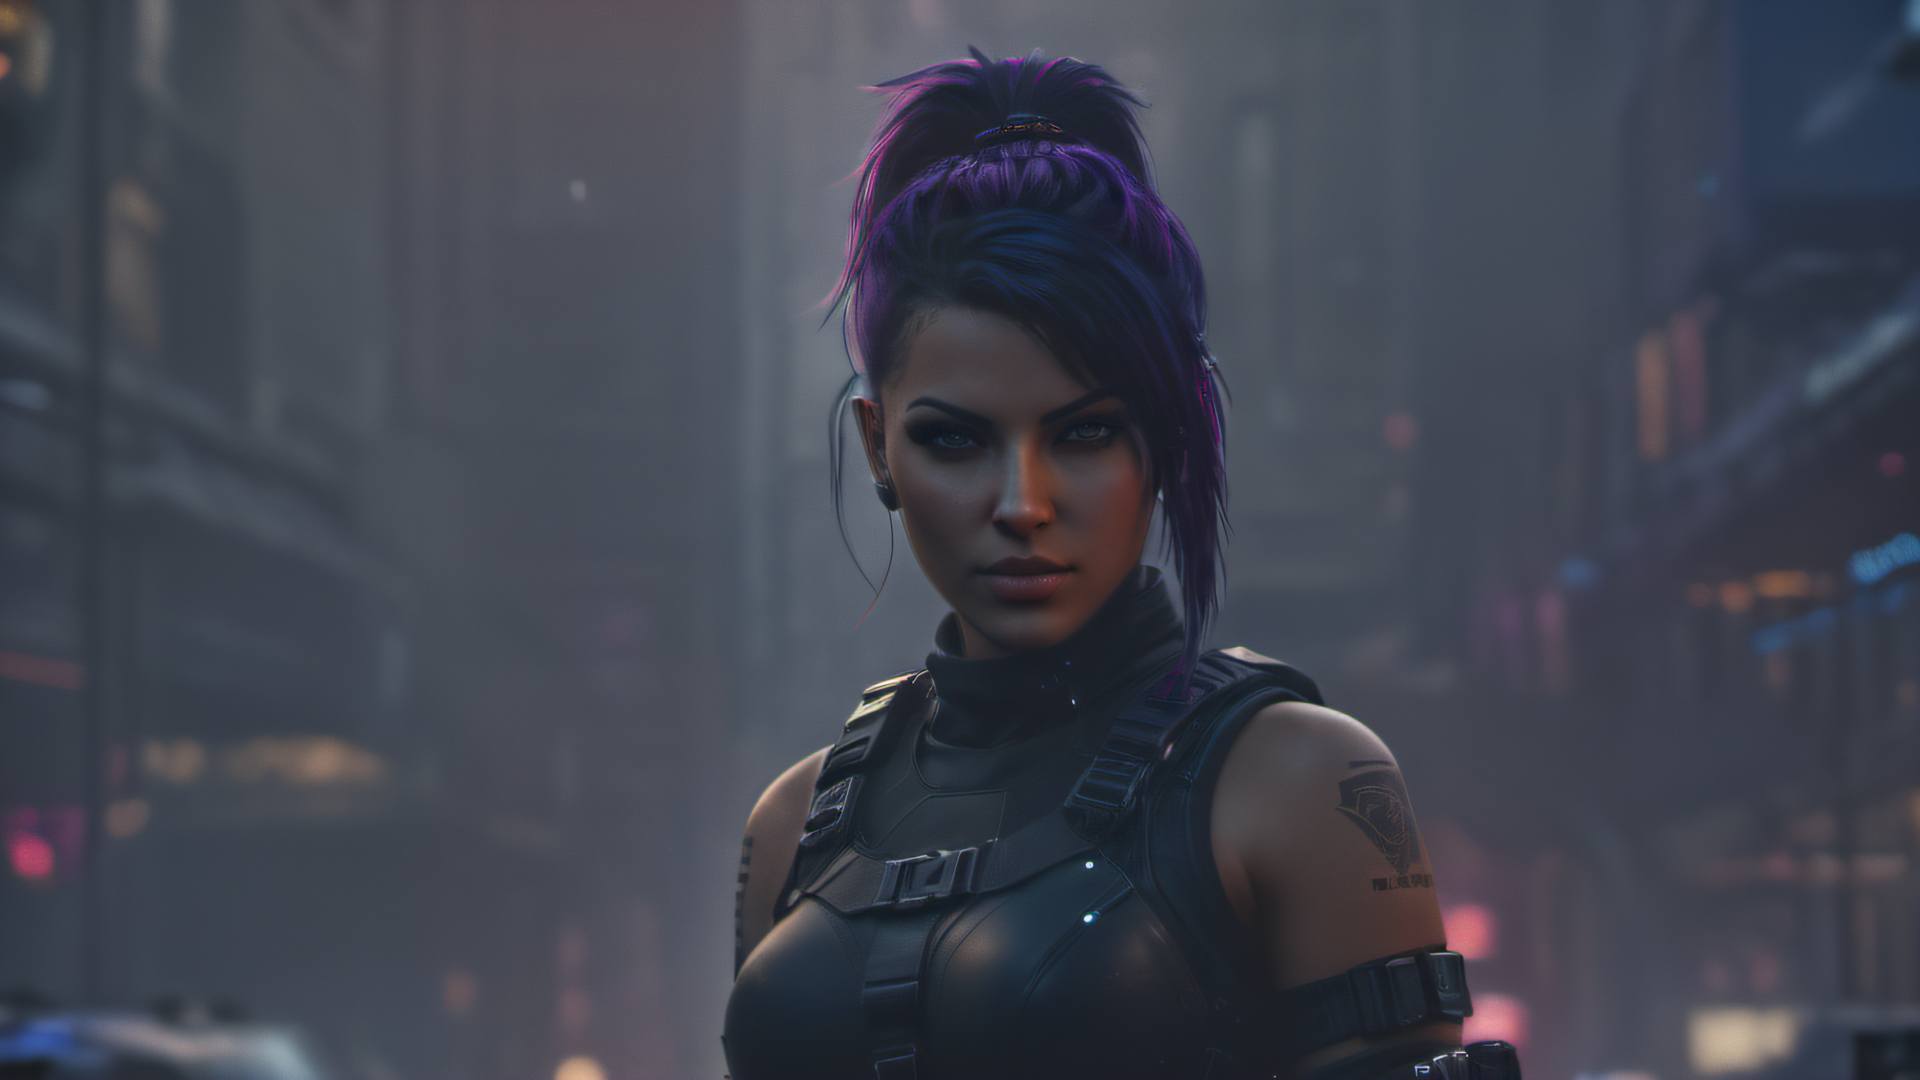 features missing in Cyberpunk 2077